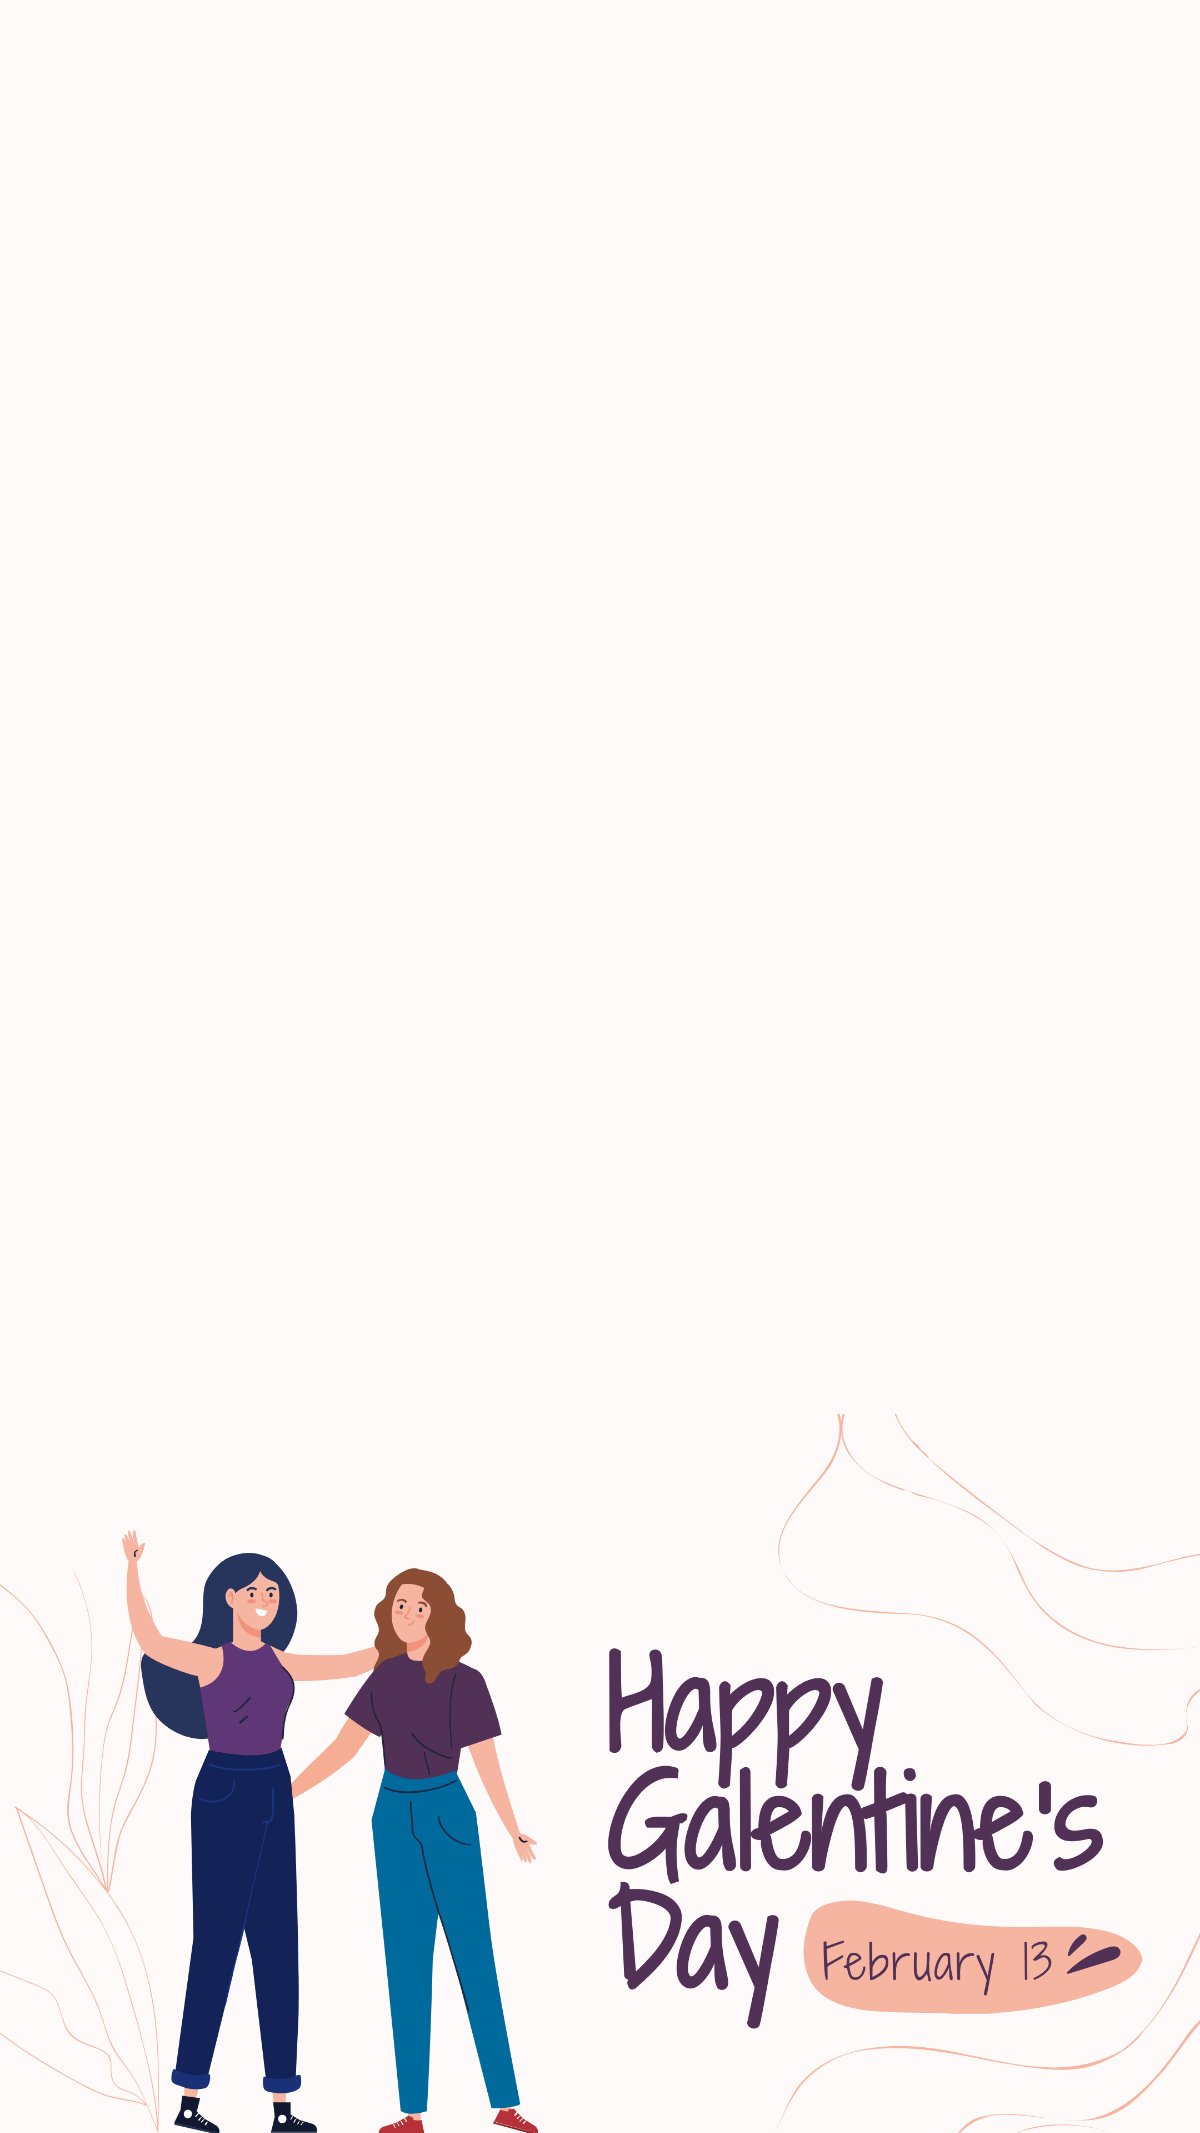 Happy Galentines Day Snapchat Geofilter Template